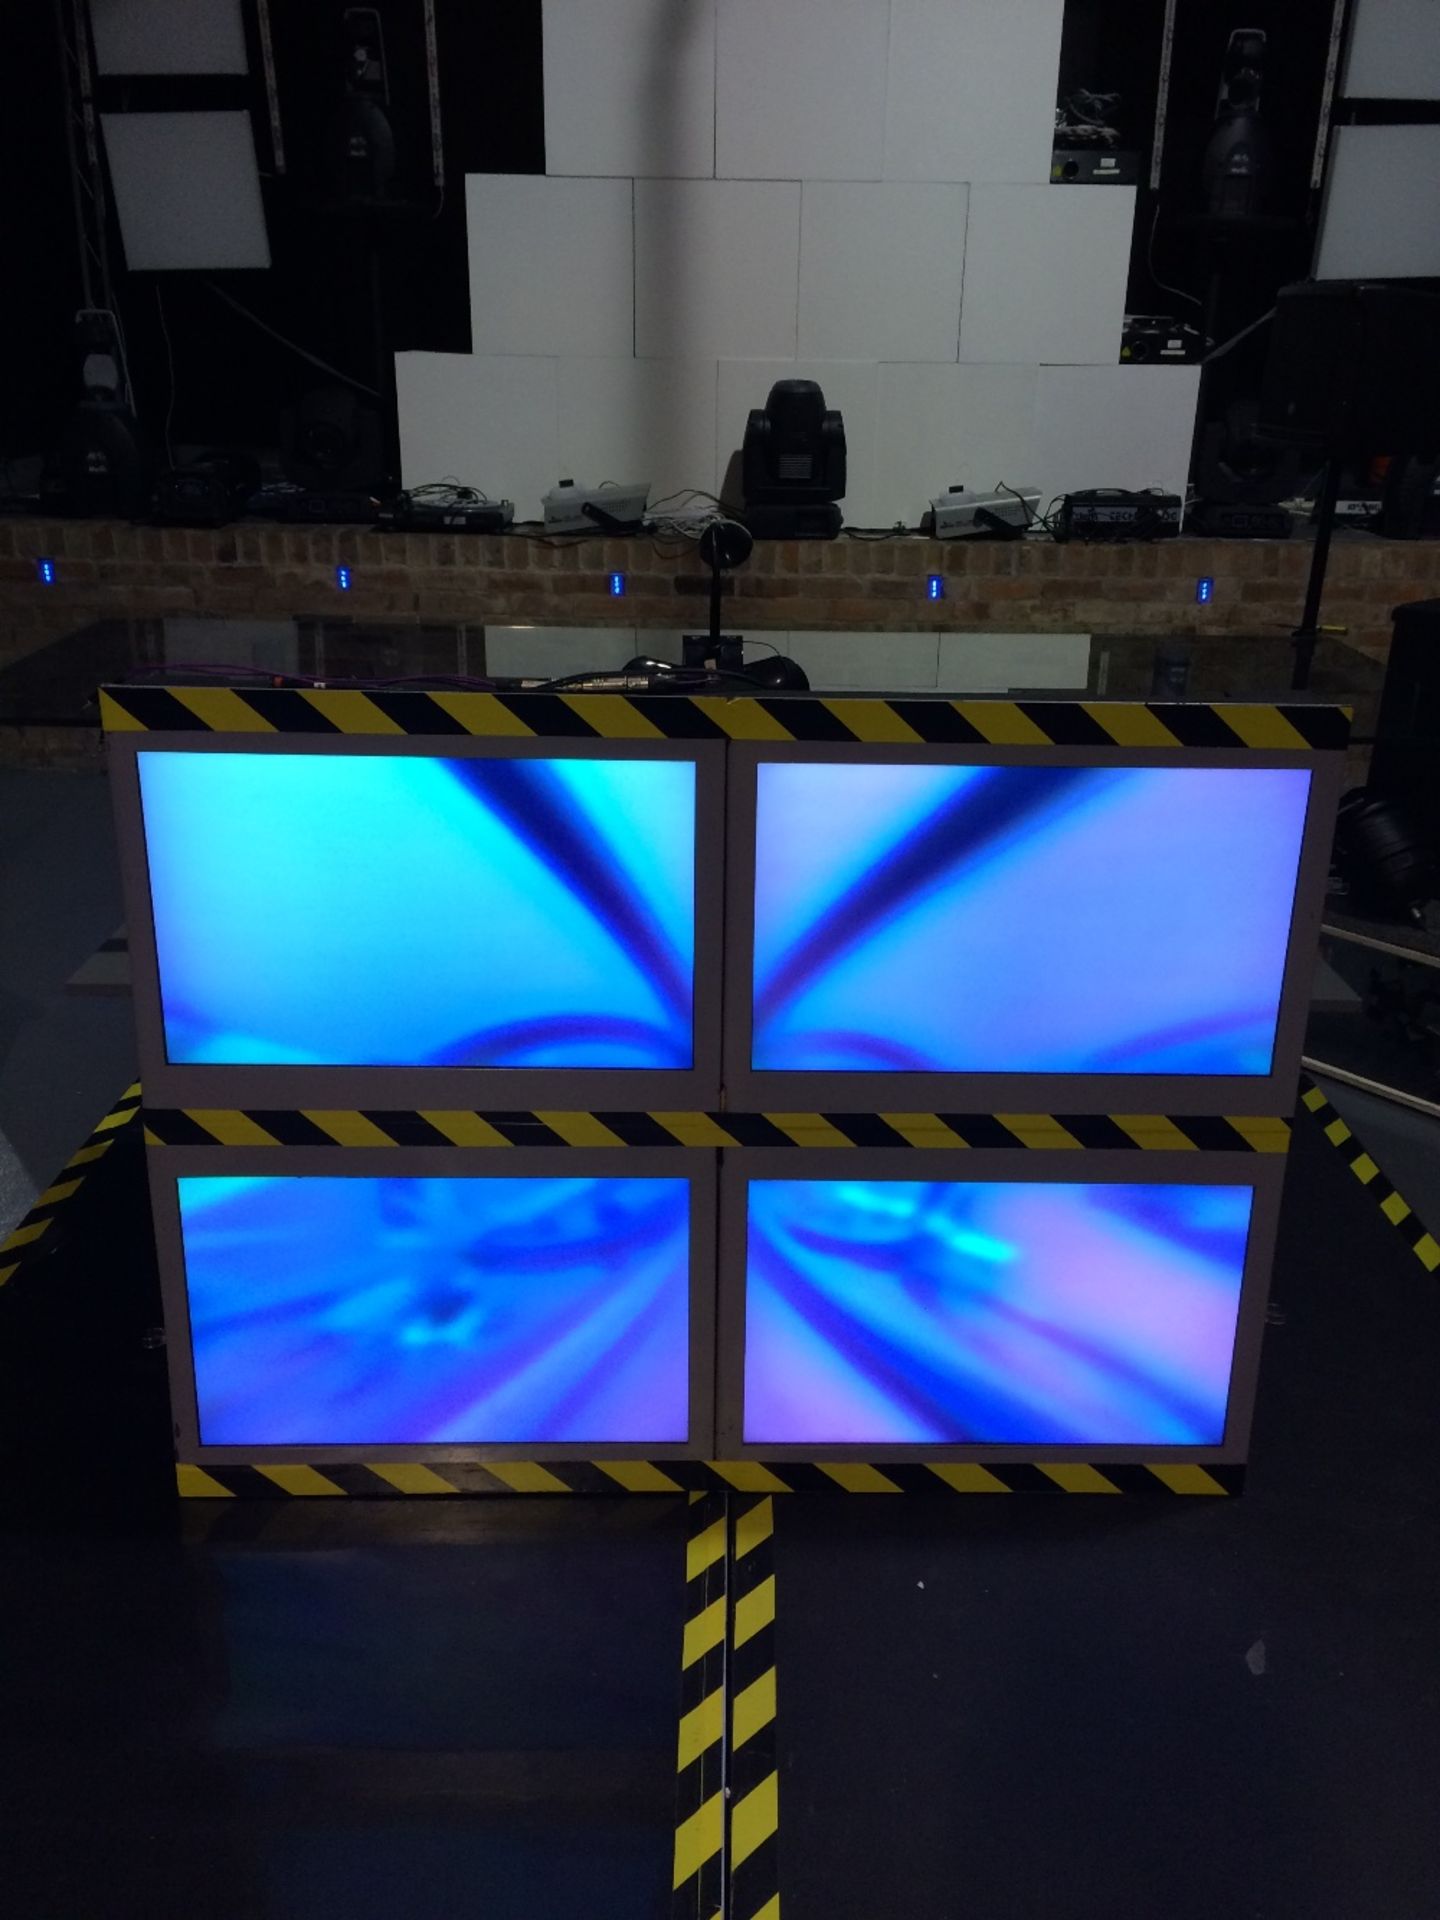 Custom Design Dj Consoe With 4 Screen Lcd Video Wall Metal Front Enclosure And Stand Glass Shelf For - Image 8 of 11